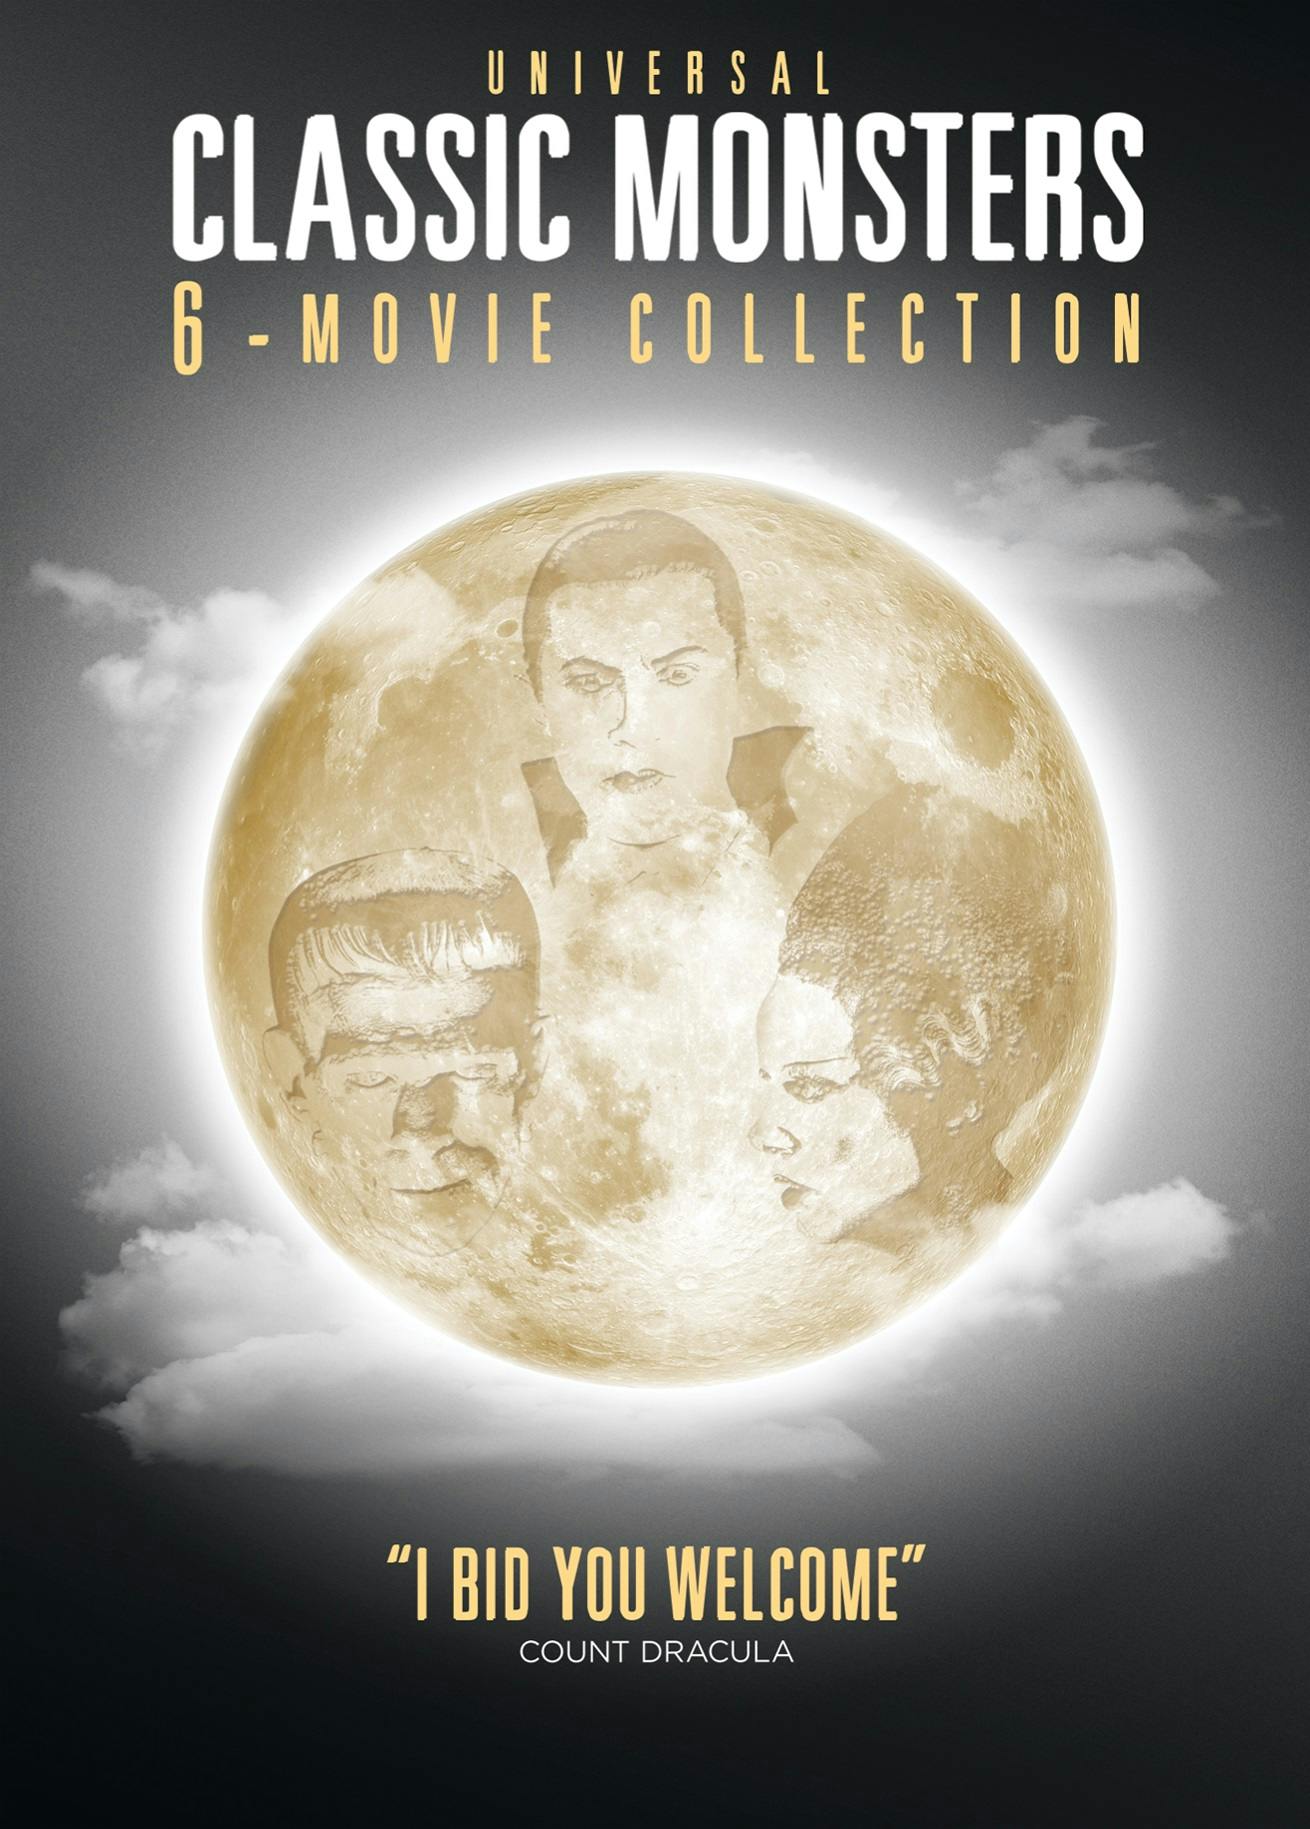 Universal Classic Monsters Collection (Box Set) [DVD]